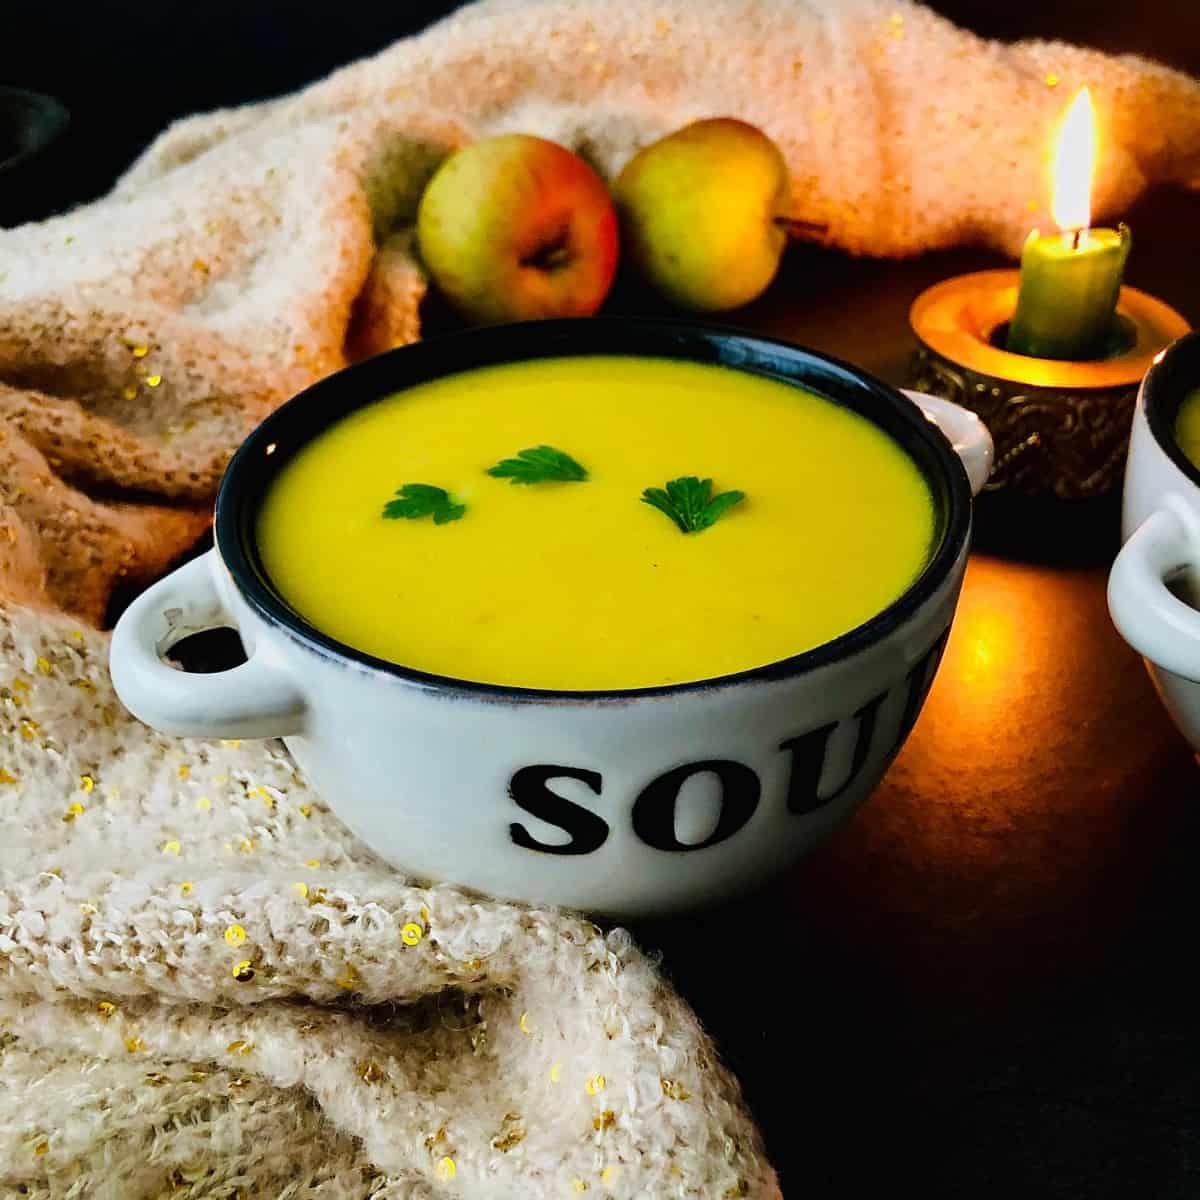 Bowl of Mulligatawny soup. The bowl sits nestled in a soft wool fabric. A lit candle and to whole apples sit in the background as decoration.